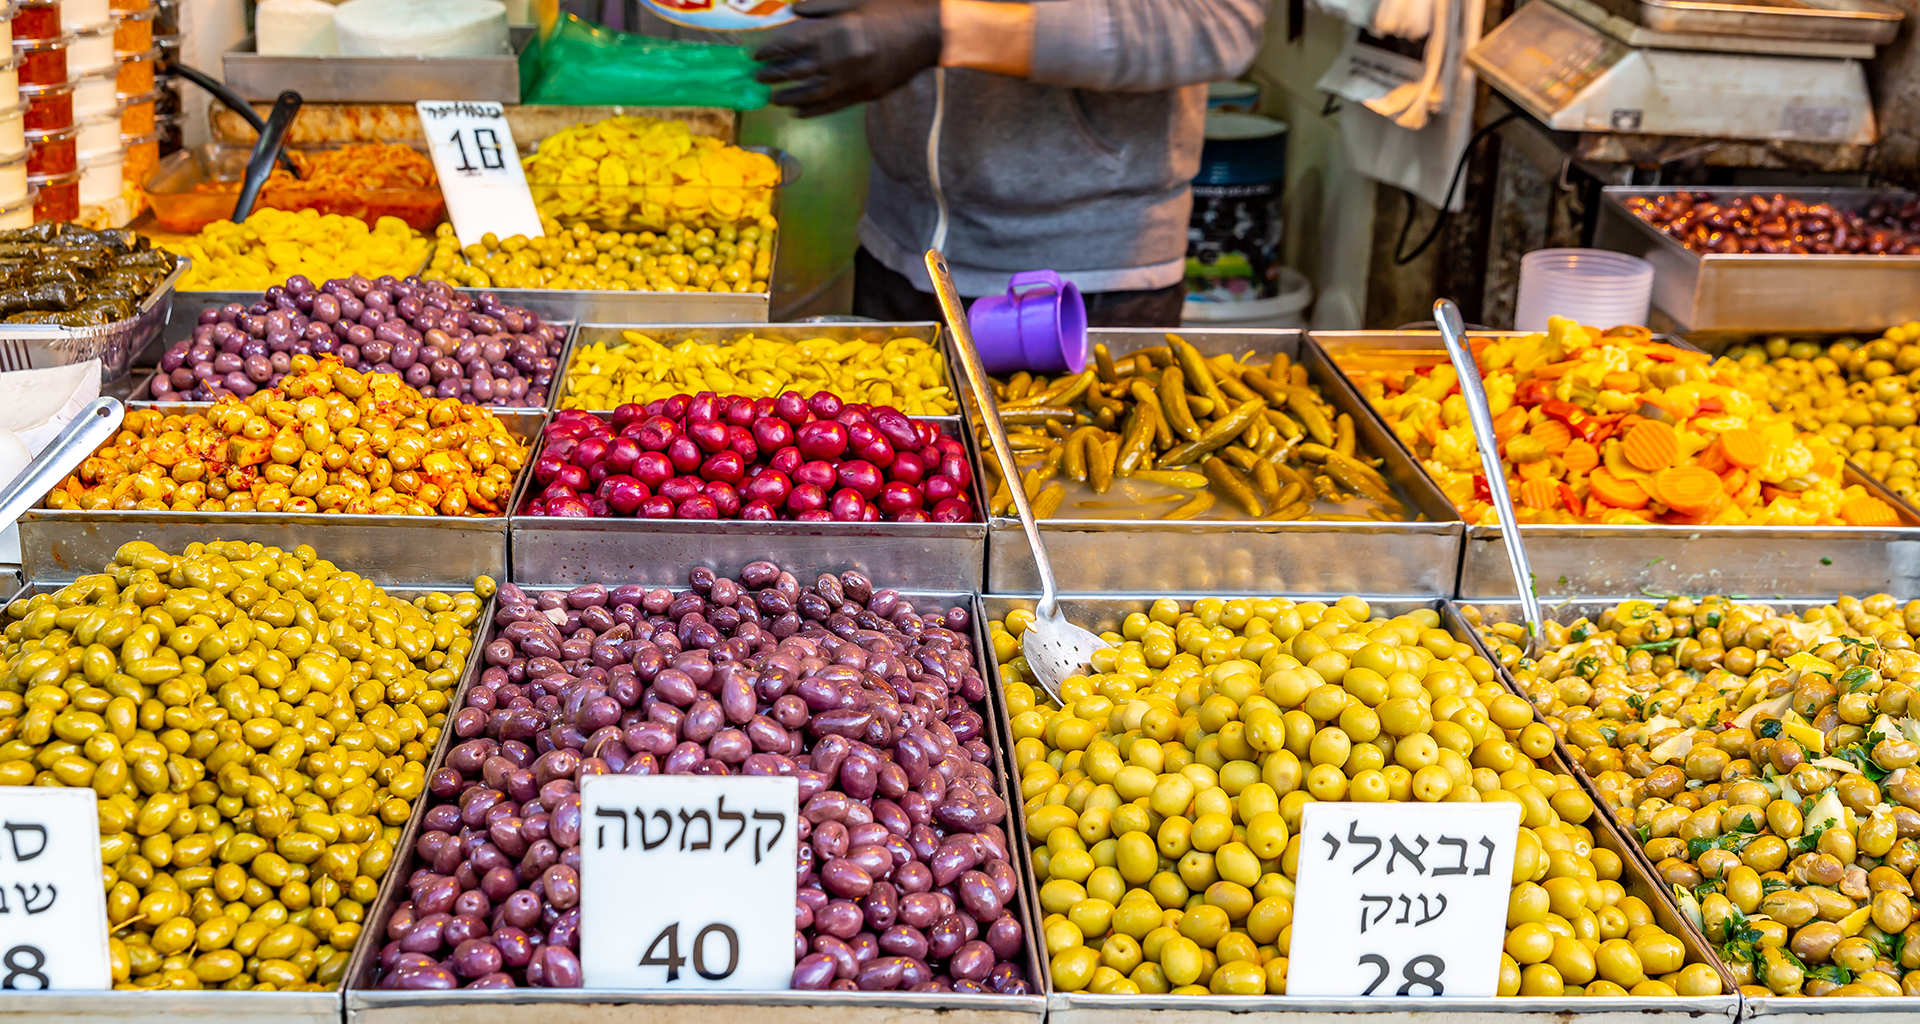 olives in a market in Israel